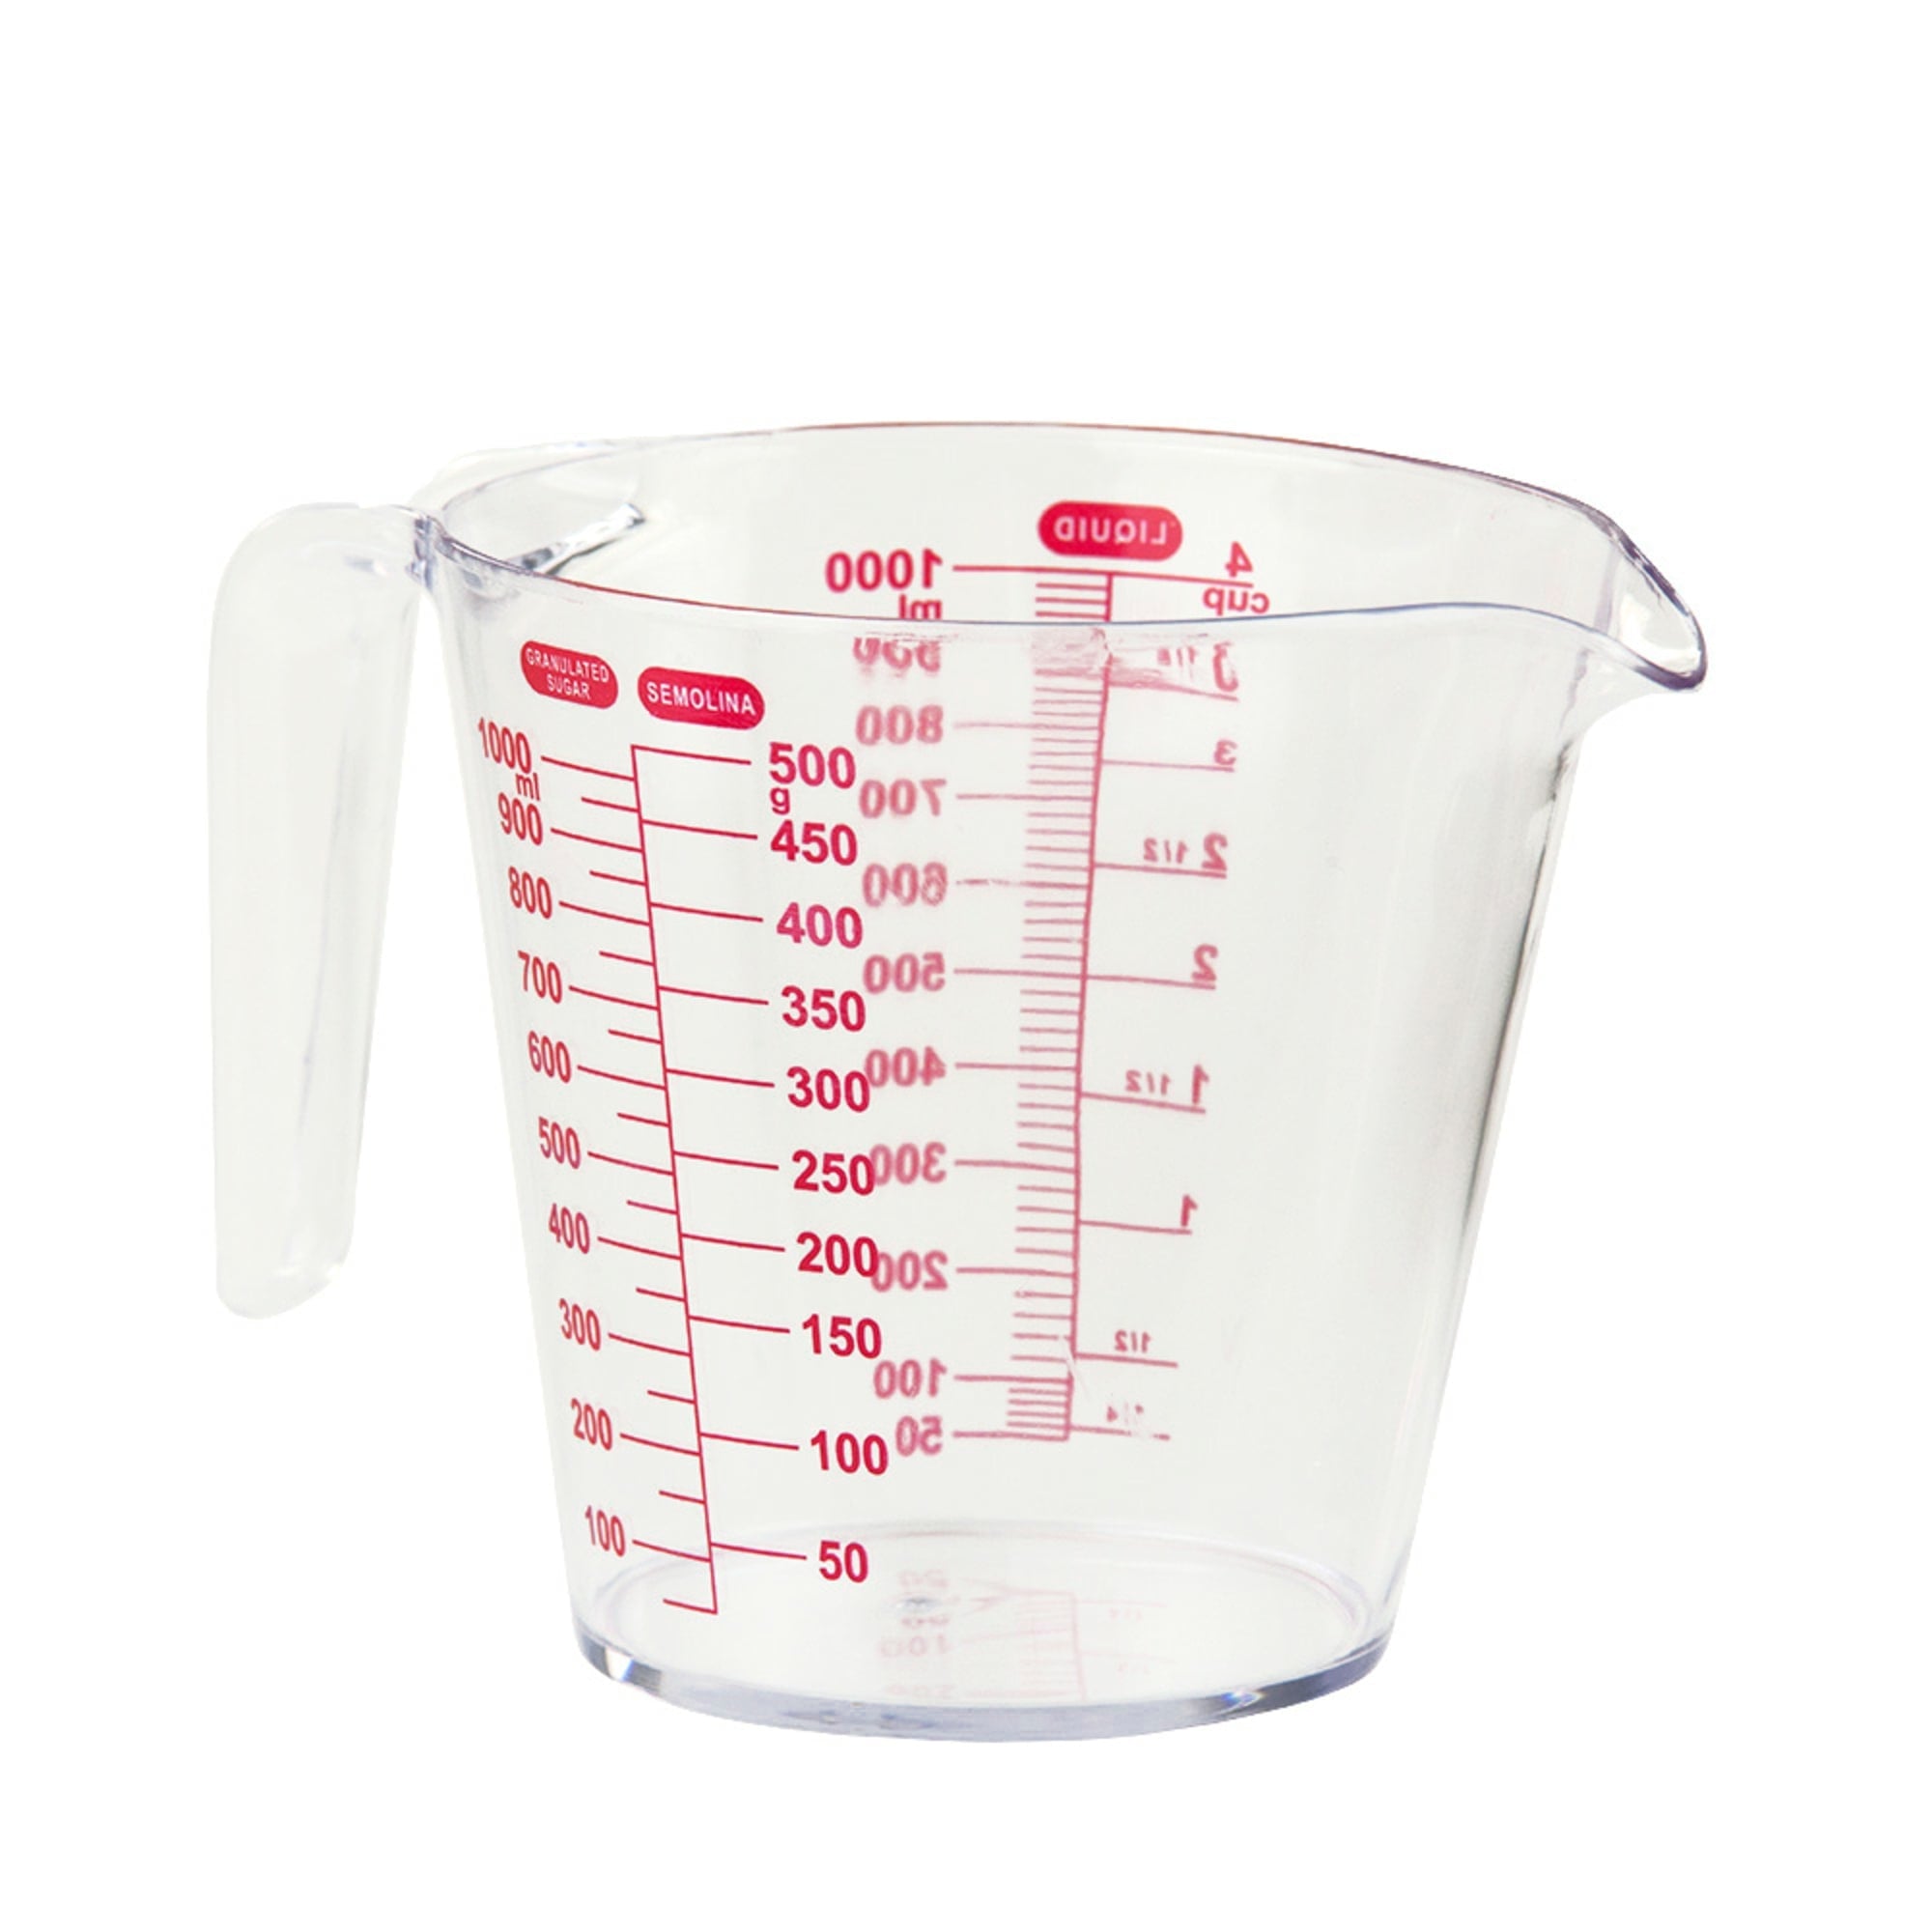 Home Basics 1 Liter Plastic Measuring Cup $1.25 EACH, CASE PACK OF 24